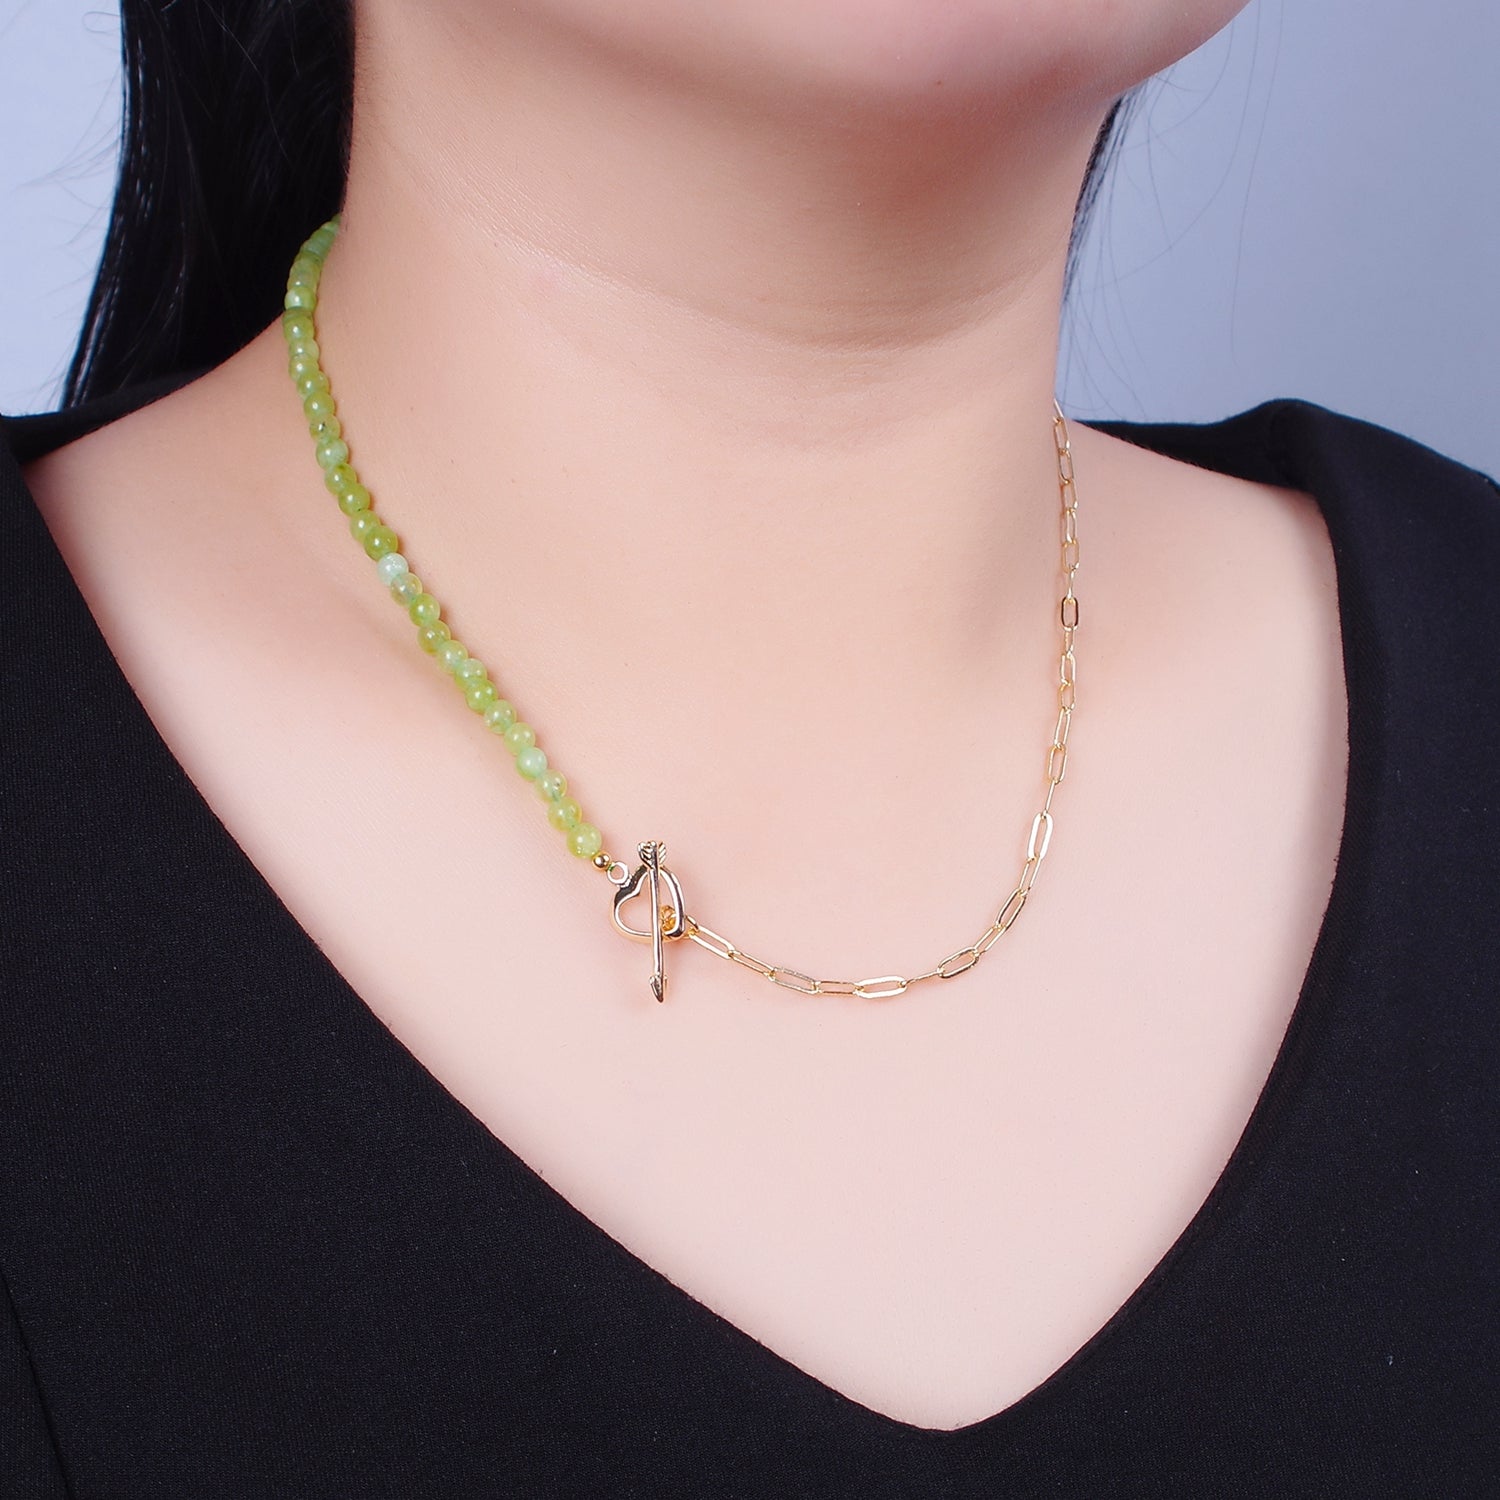 Dainty Half Bead Half Link Chain Necklace, 24k Gold Filled Paperclip Chain with Green Jade Necklace Heart Toggle Clasp WA-959 - DLUXCA